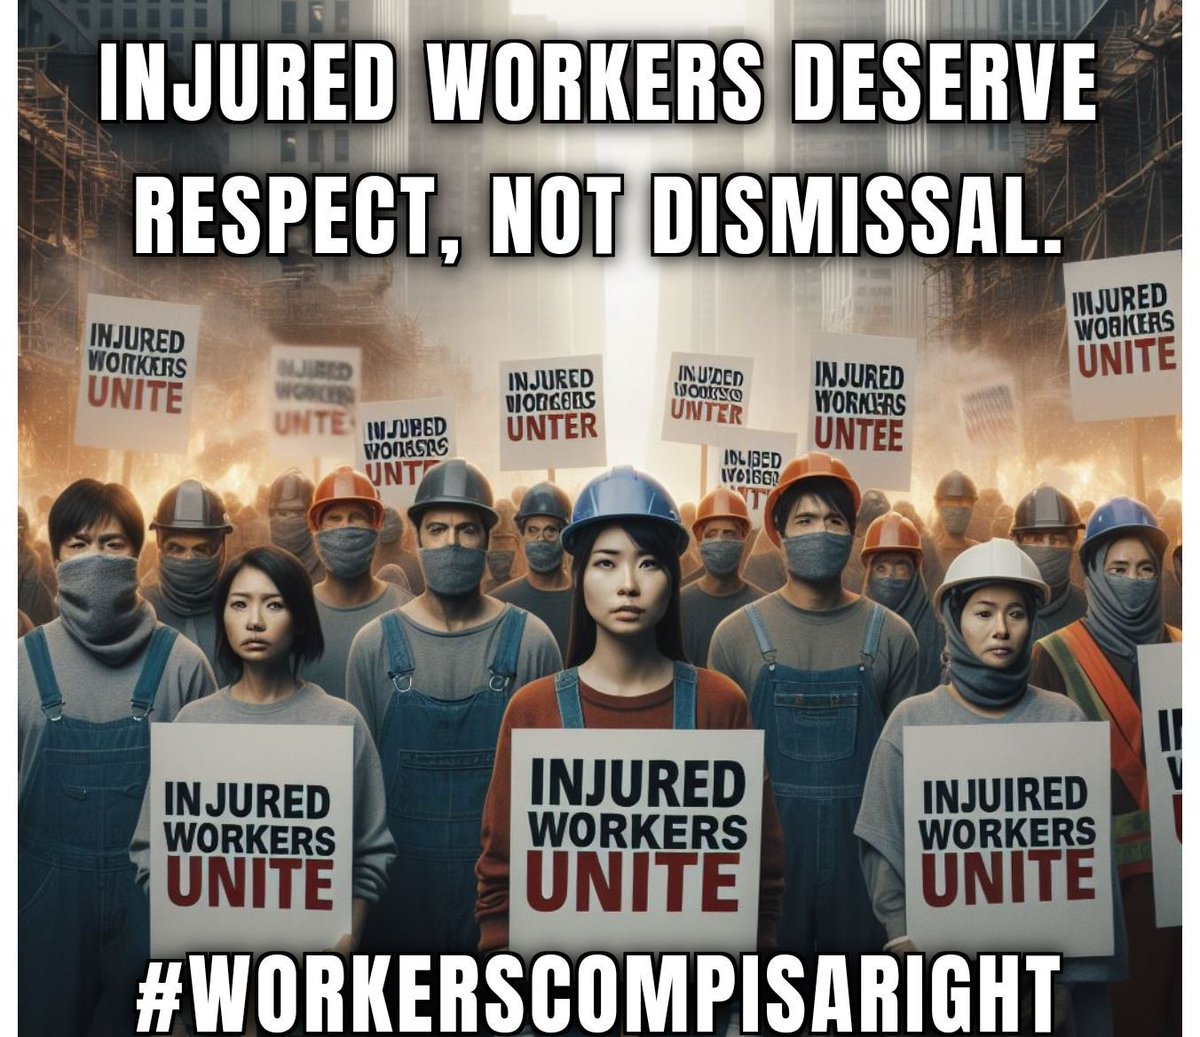 Injured workers deserve respect, not dismissal. #WorkersCompIsARight
 Let's ensure every worker is treated with dignity and fairness! #InjuredWorkers #Respect